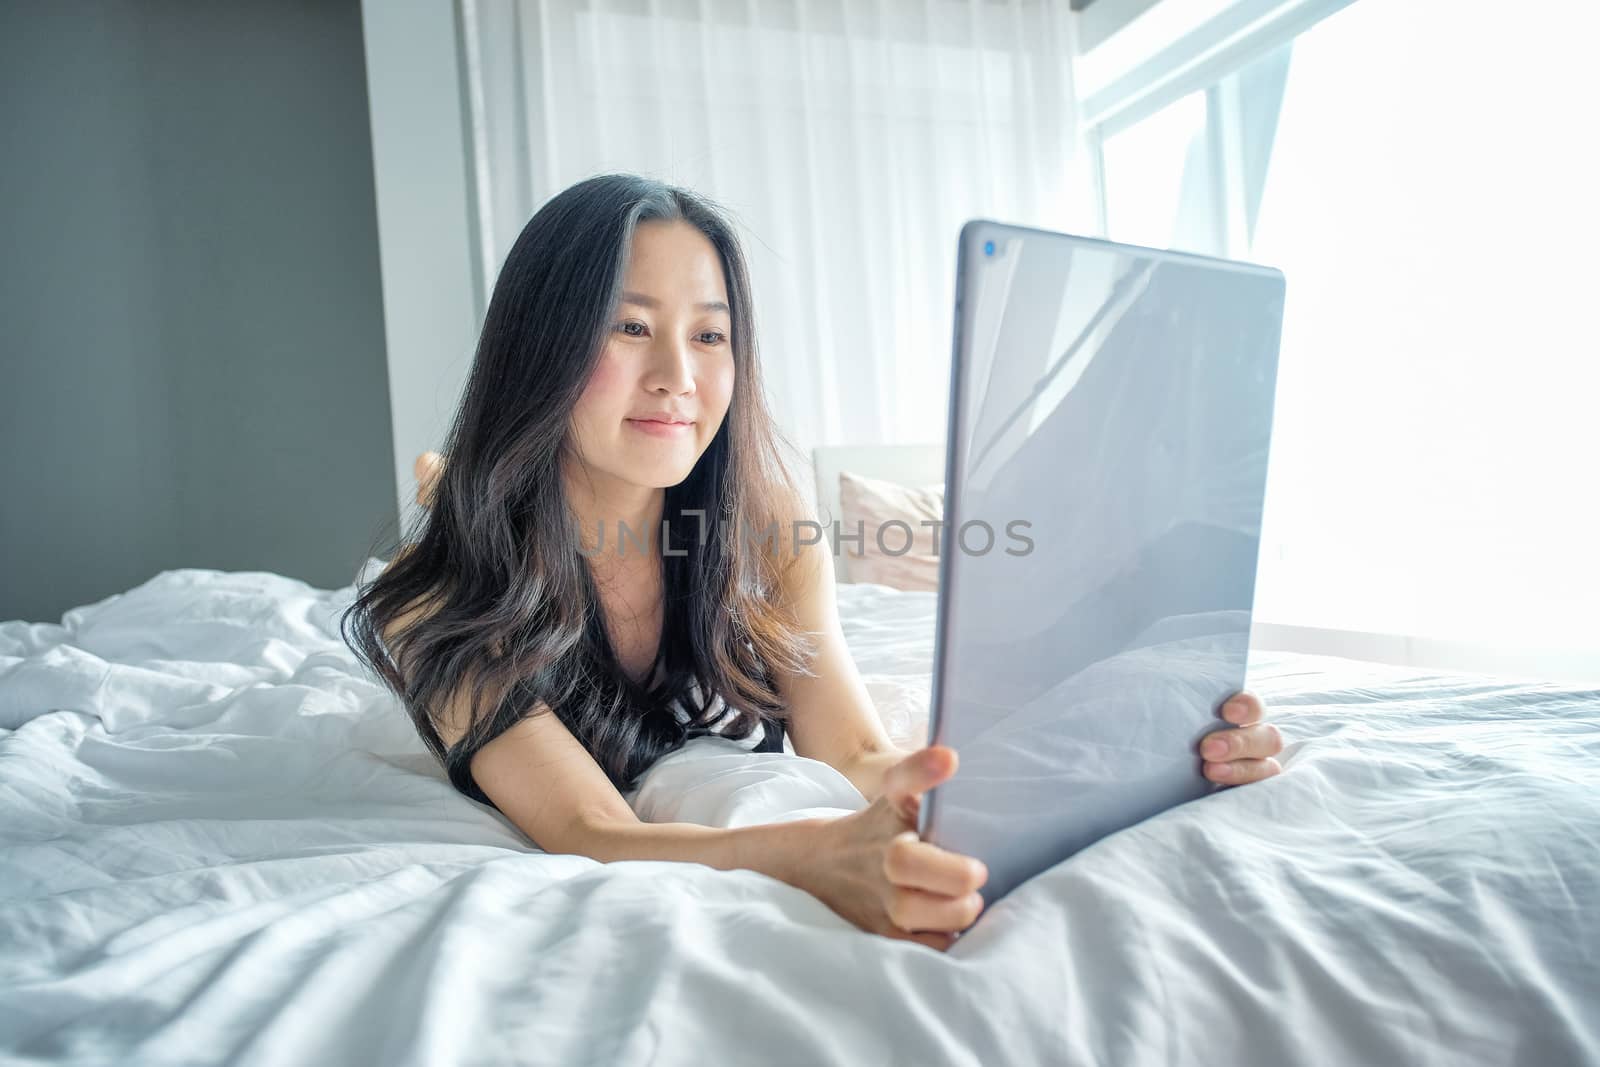 Yound woman using tablet on the bed 